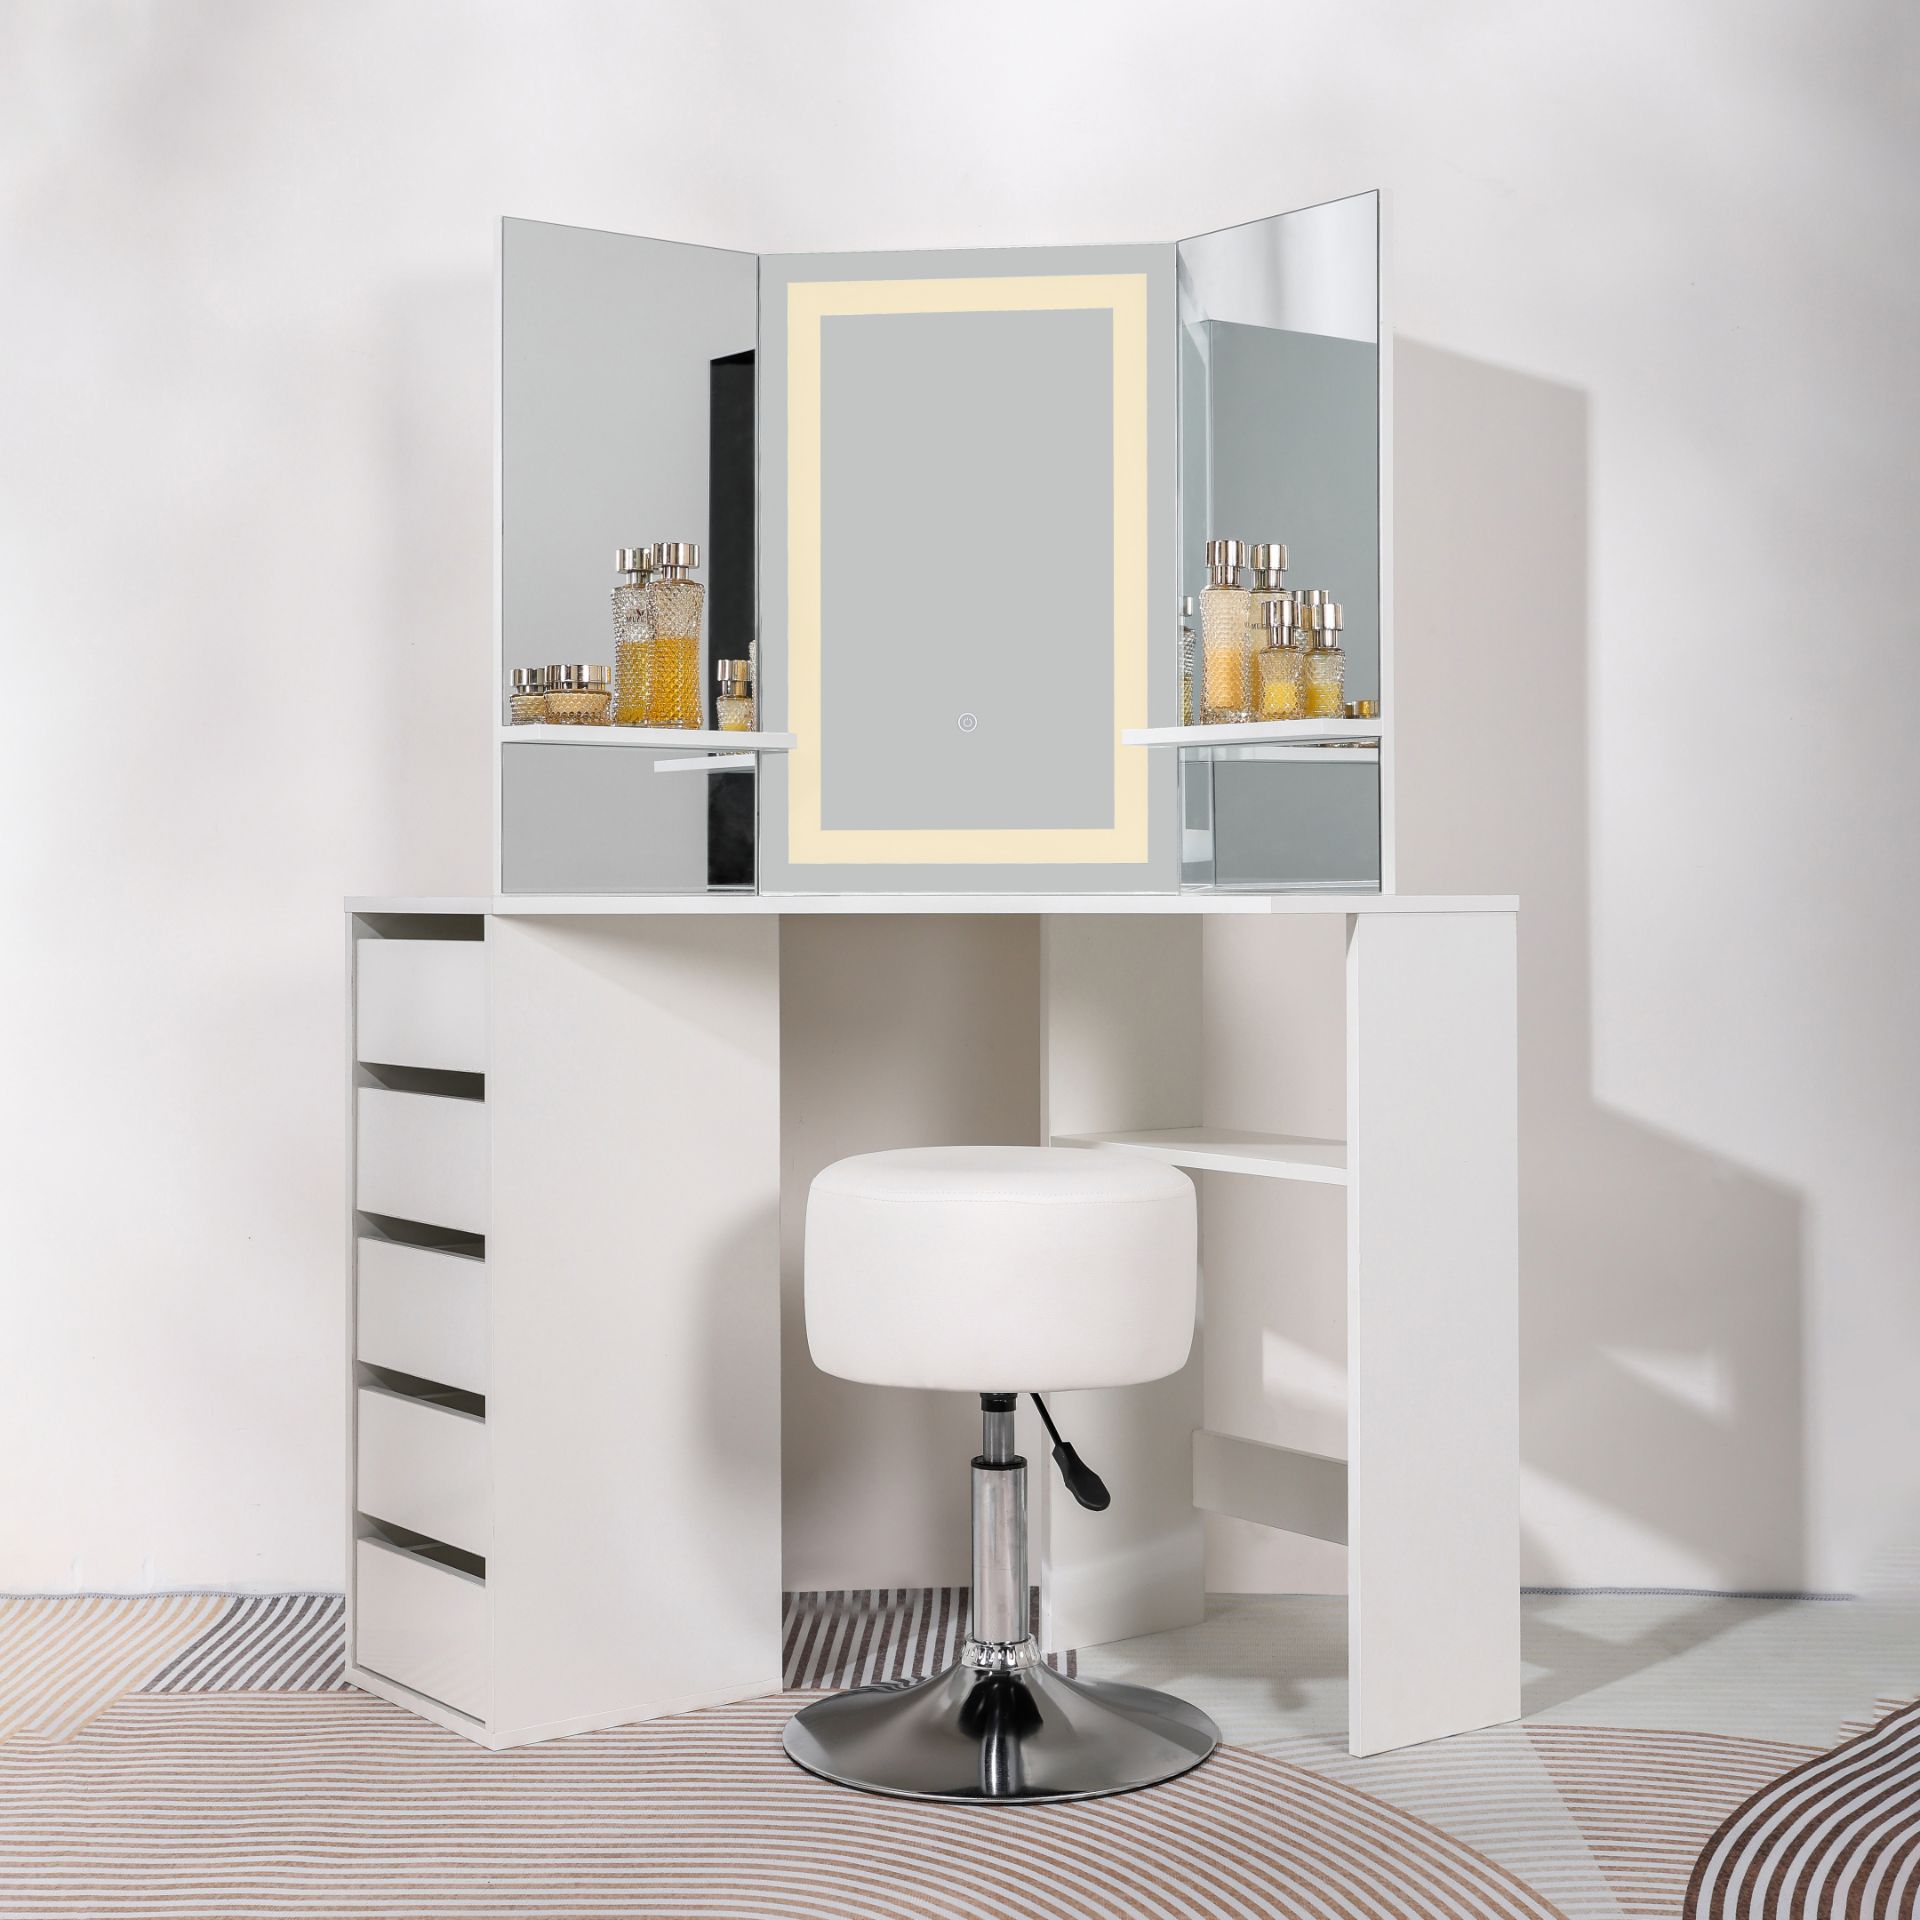 BRAND NEW MAKE UP CORNER DRESSING TABLE 5 DRAWER WITH TOUCH LED MIRROR & STOOL RRP £350 - Image 4 of 4